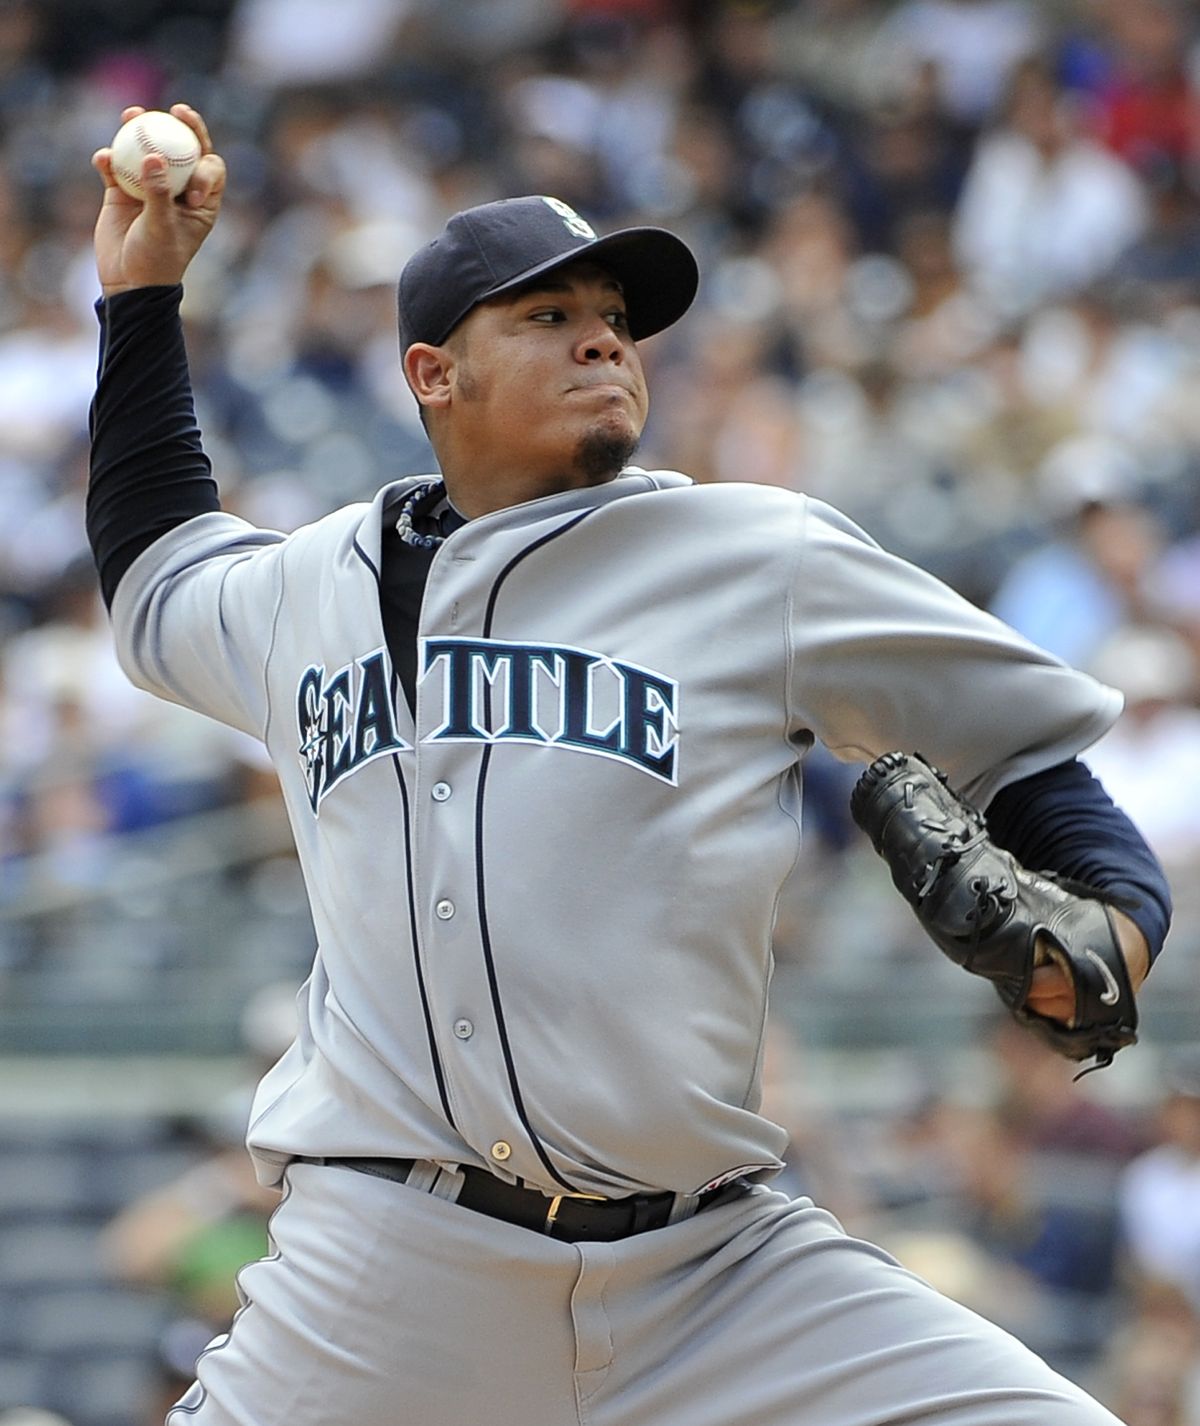 Seattle Mariners starting pitcher Felix Hernandez throws against the New York Yankees in the first inning of a baseball game Wednesday, July 27, 2011 at Yankee Stadium in New York. The Mariners won 9-2. (Kathy Kmonicek / Fr170189 Ap)